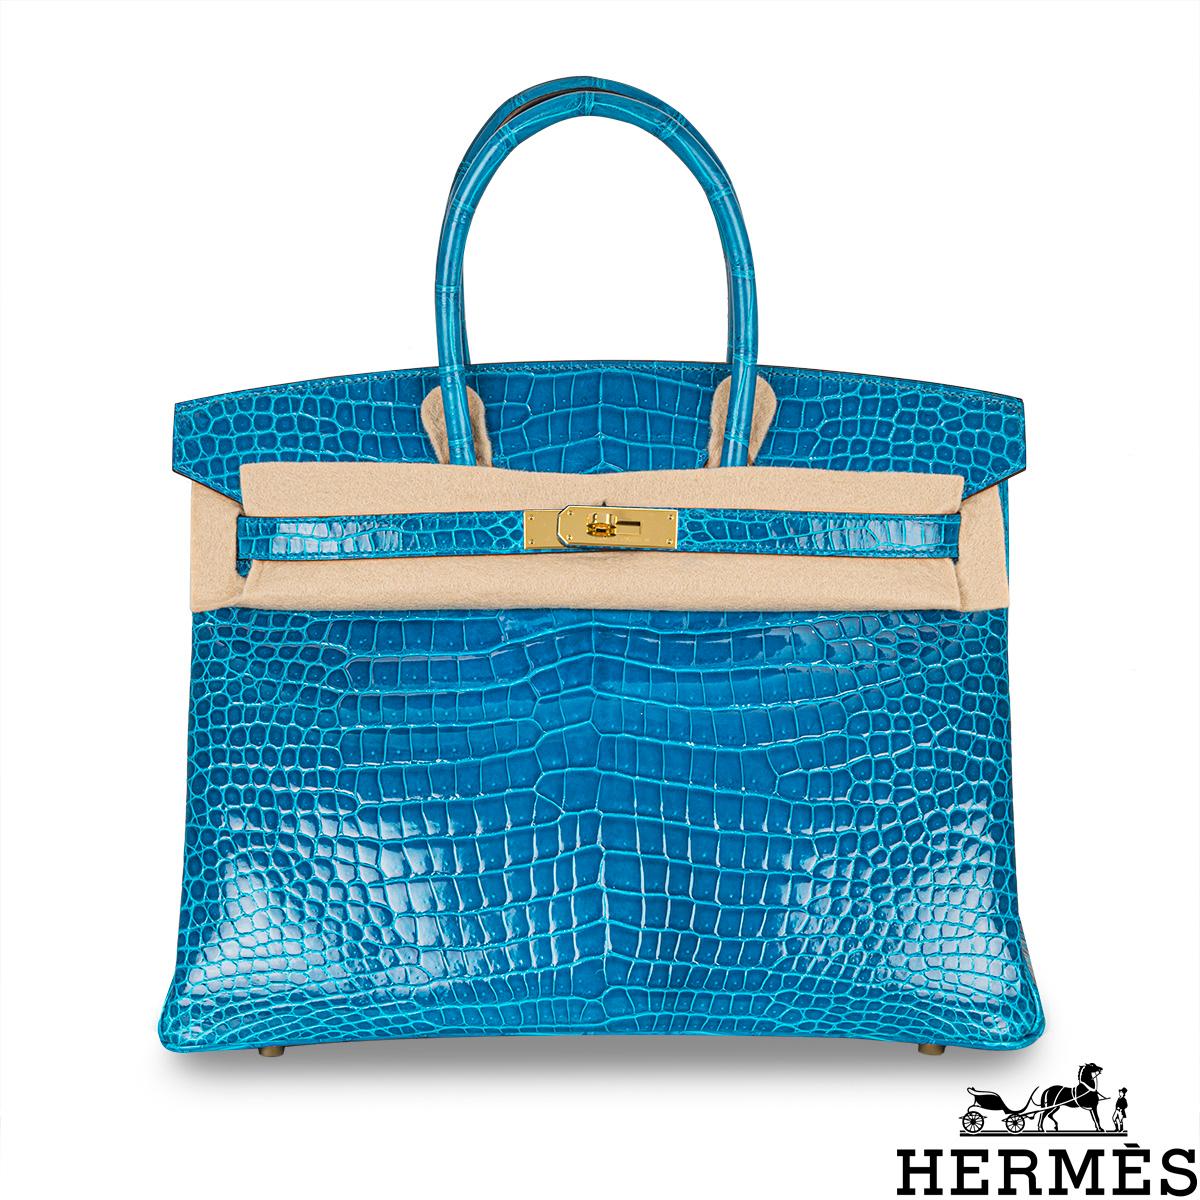 An incredible Hermès 35cm Birkin bag. The exterior of this exotic Birkin is in a shiny Bleu Izmir Porous Crocodile with tonal stitching. It adorns gold-tone hardware, two top handles and front toggle closure. The interior features a zipper pocket